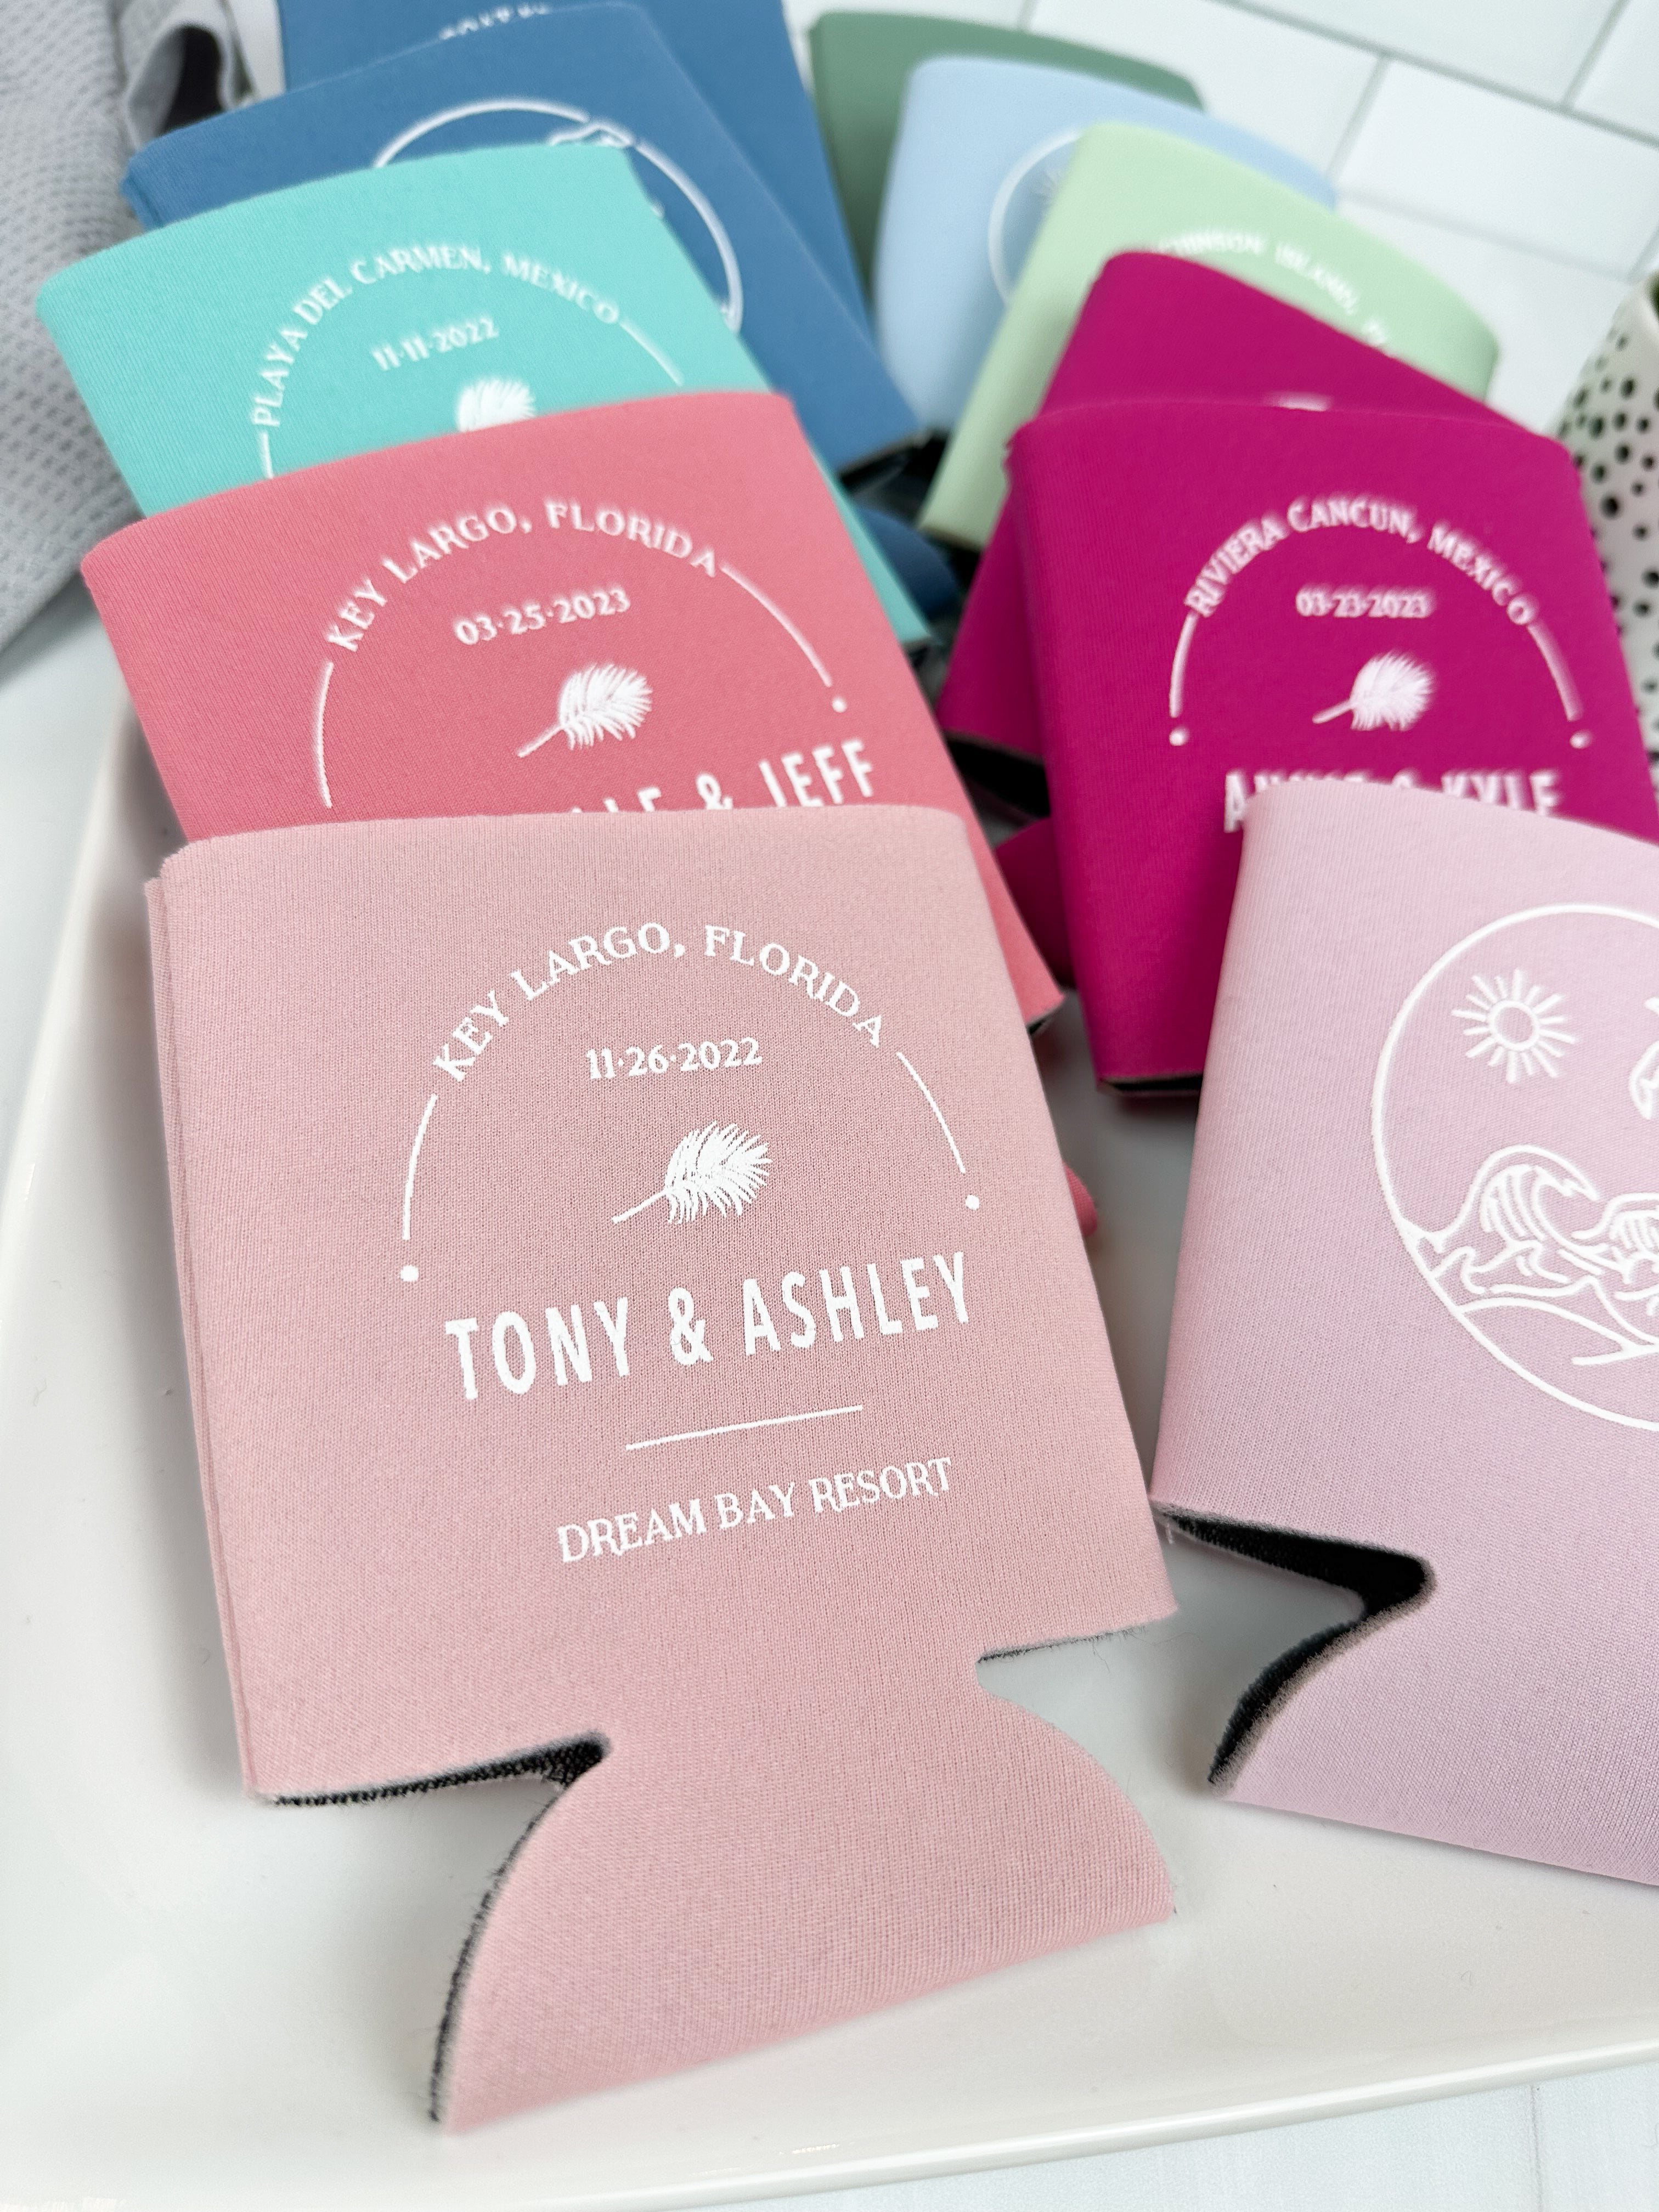 Smitten Custom Wedding Can Coolers with Couple's Names